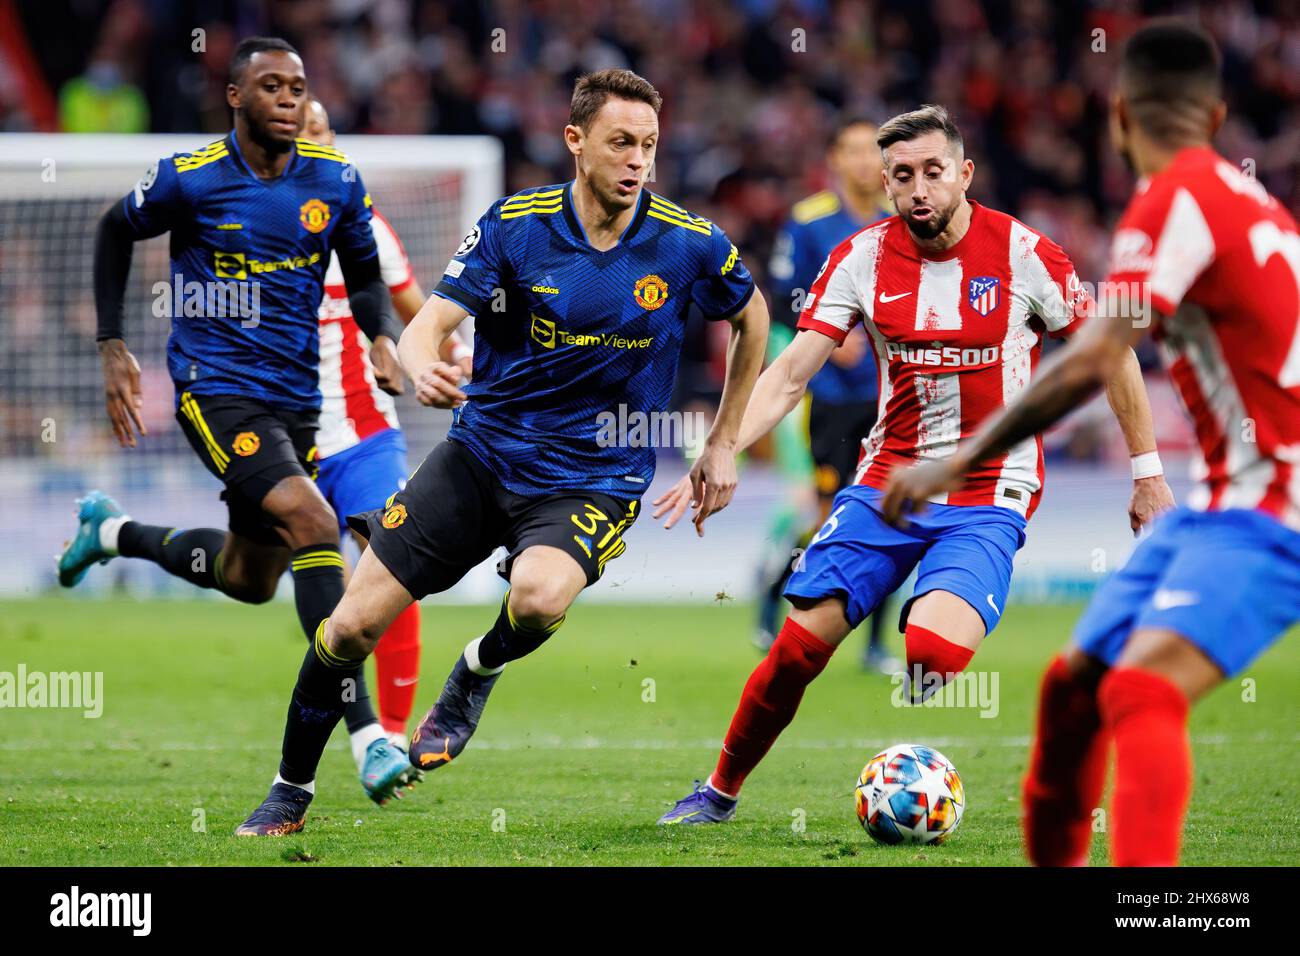 MADRID - FEB 23: Nemanja Matic in action at the Champions League match between Club Atletico de Madrid and Manchester United at the Metropolitano Stad Stock Photo